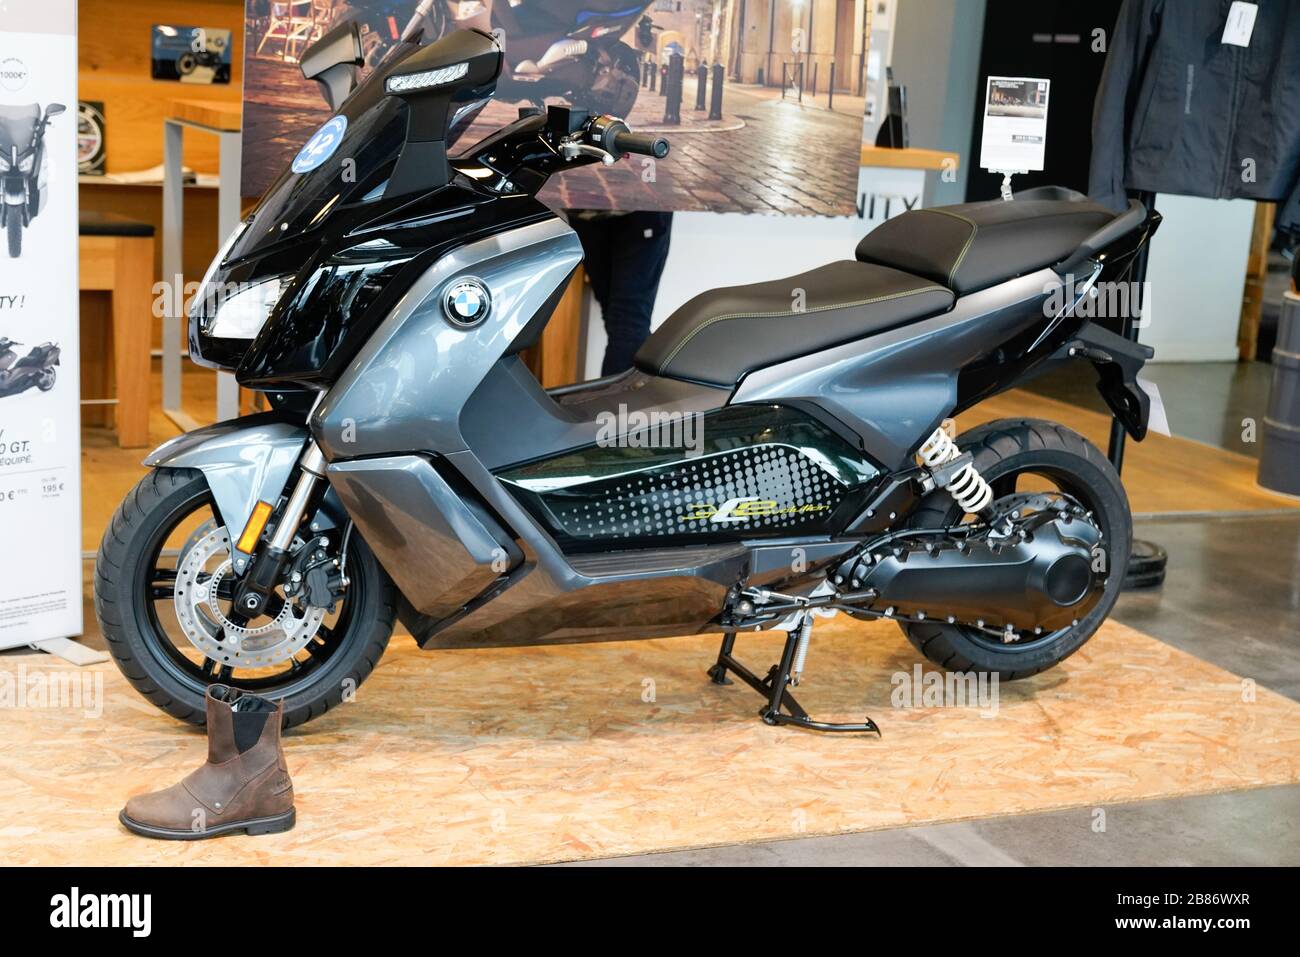 Bordeaux Aquitaine France 02 11 2020 Bmw C Evolution Electric Scooter Motorbike In Dealership Showroom Stock Photo Alamy